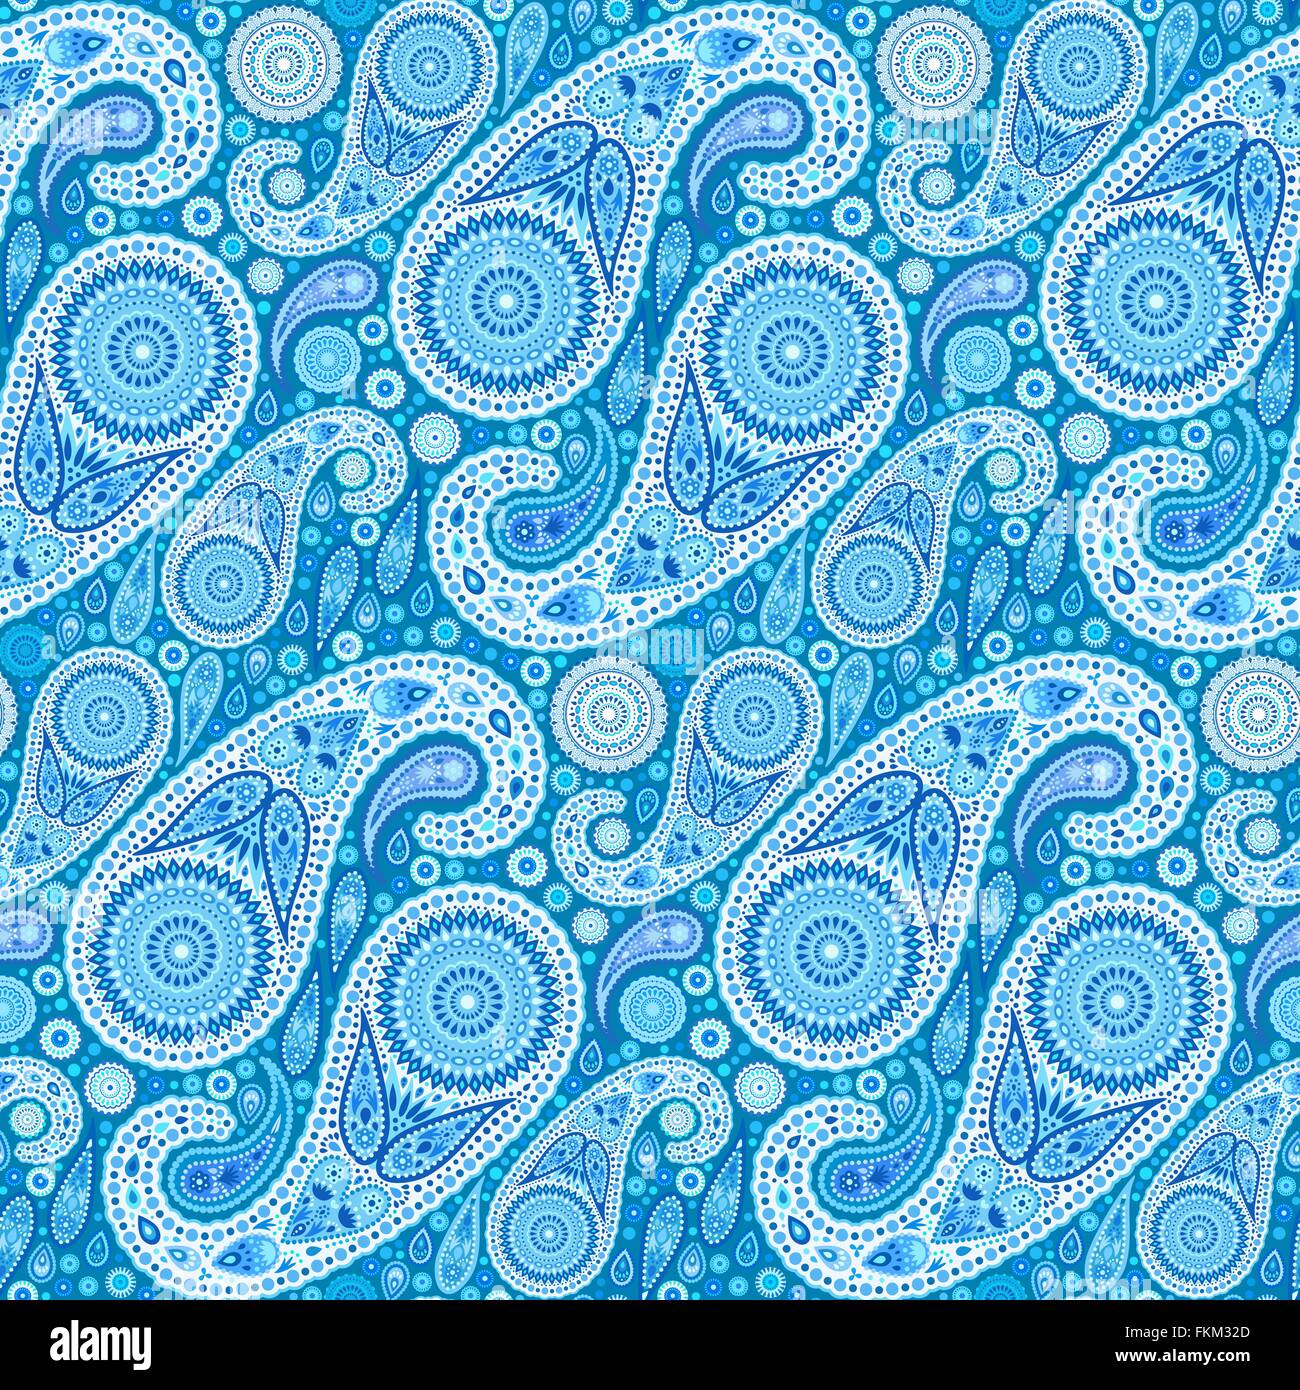 Intricate Blue Paisley Seamless Pattern Stock Vector